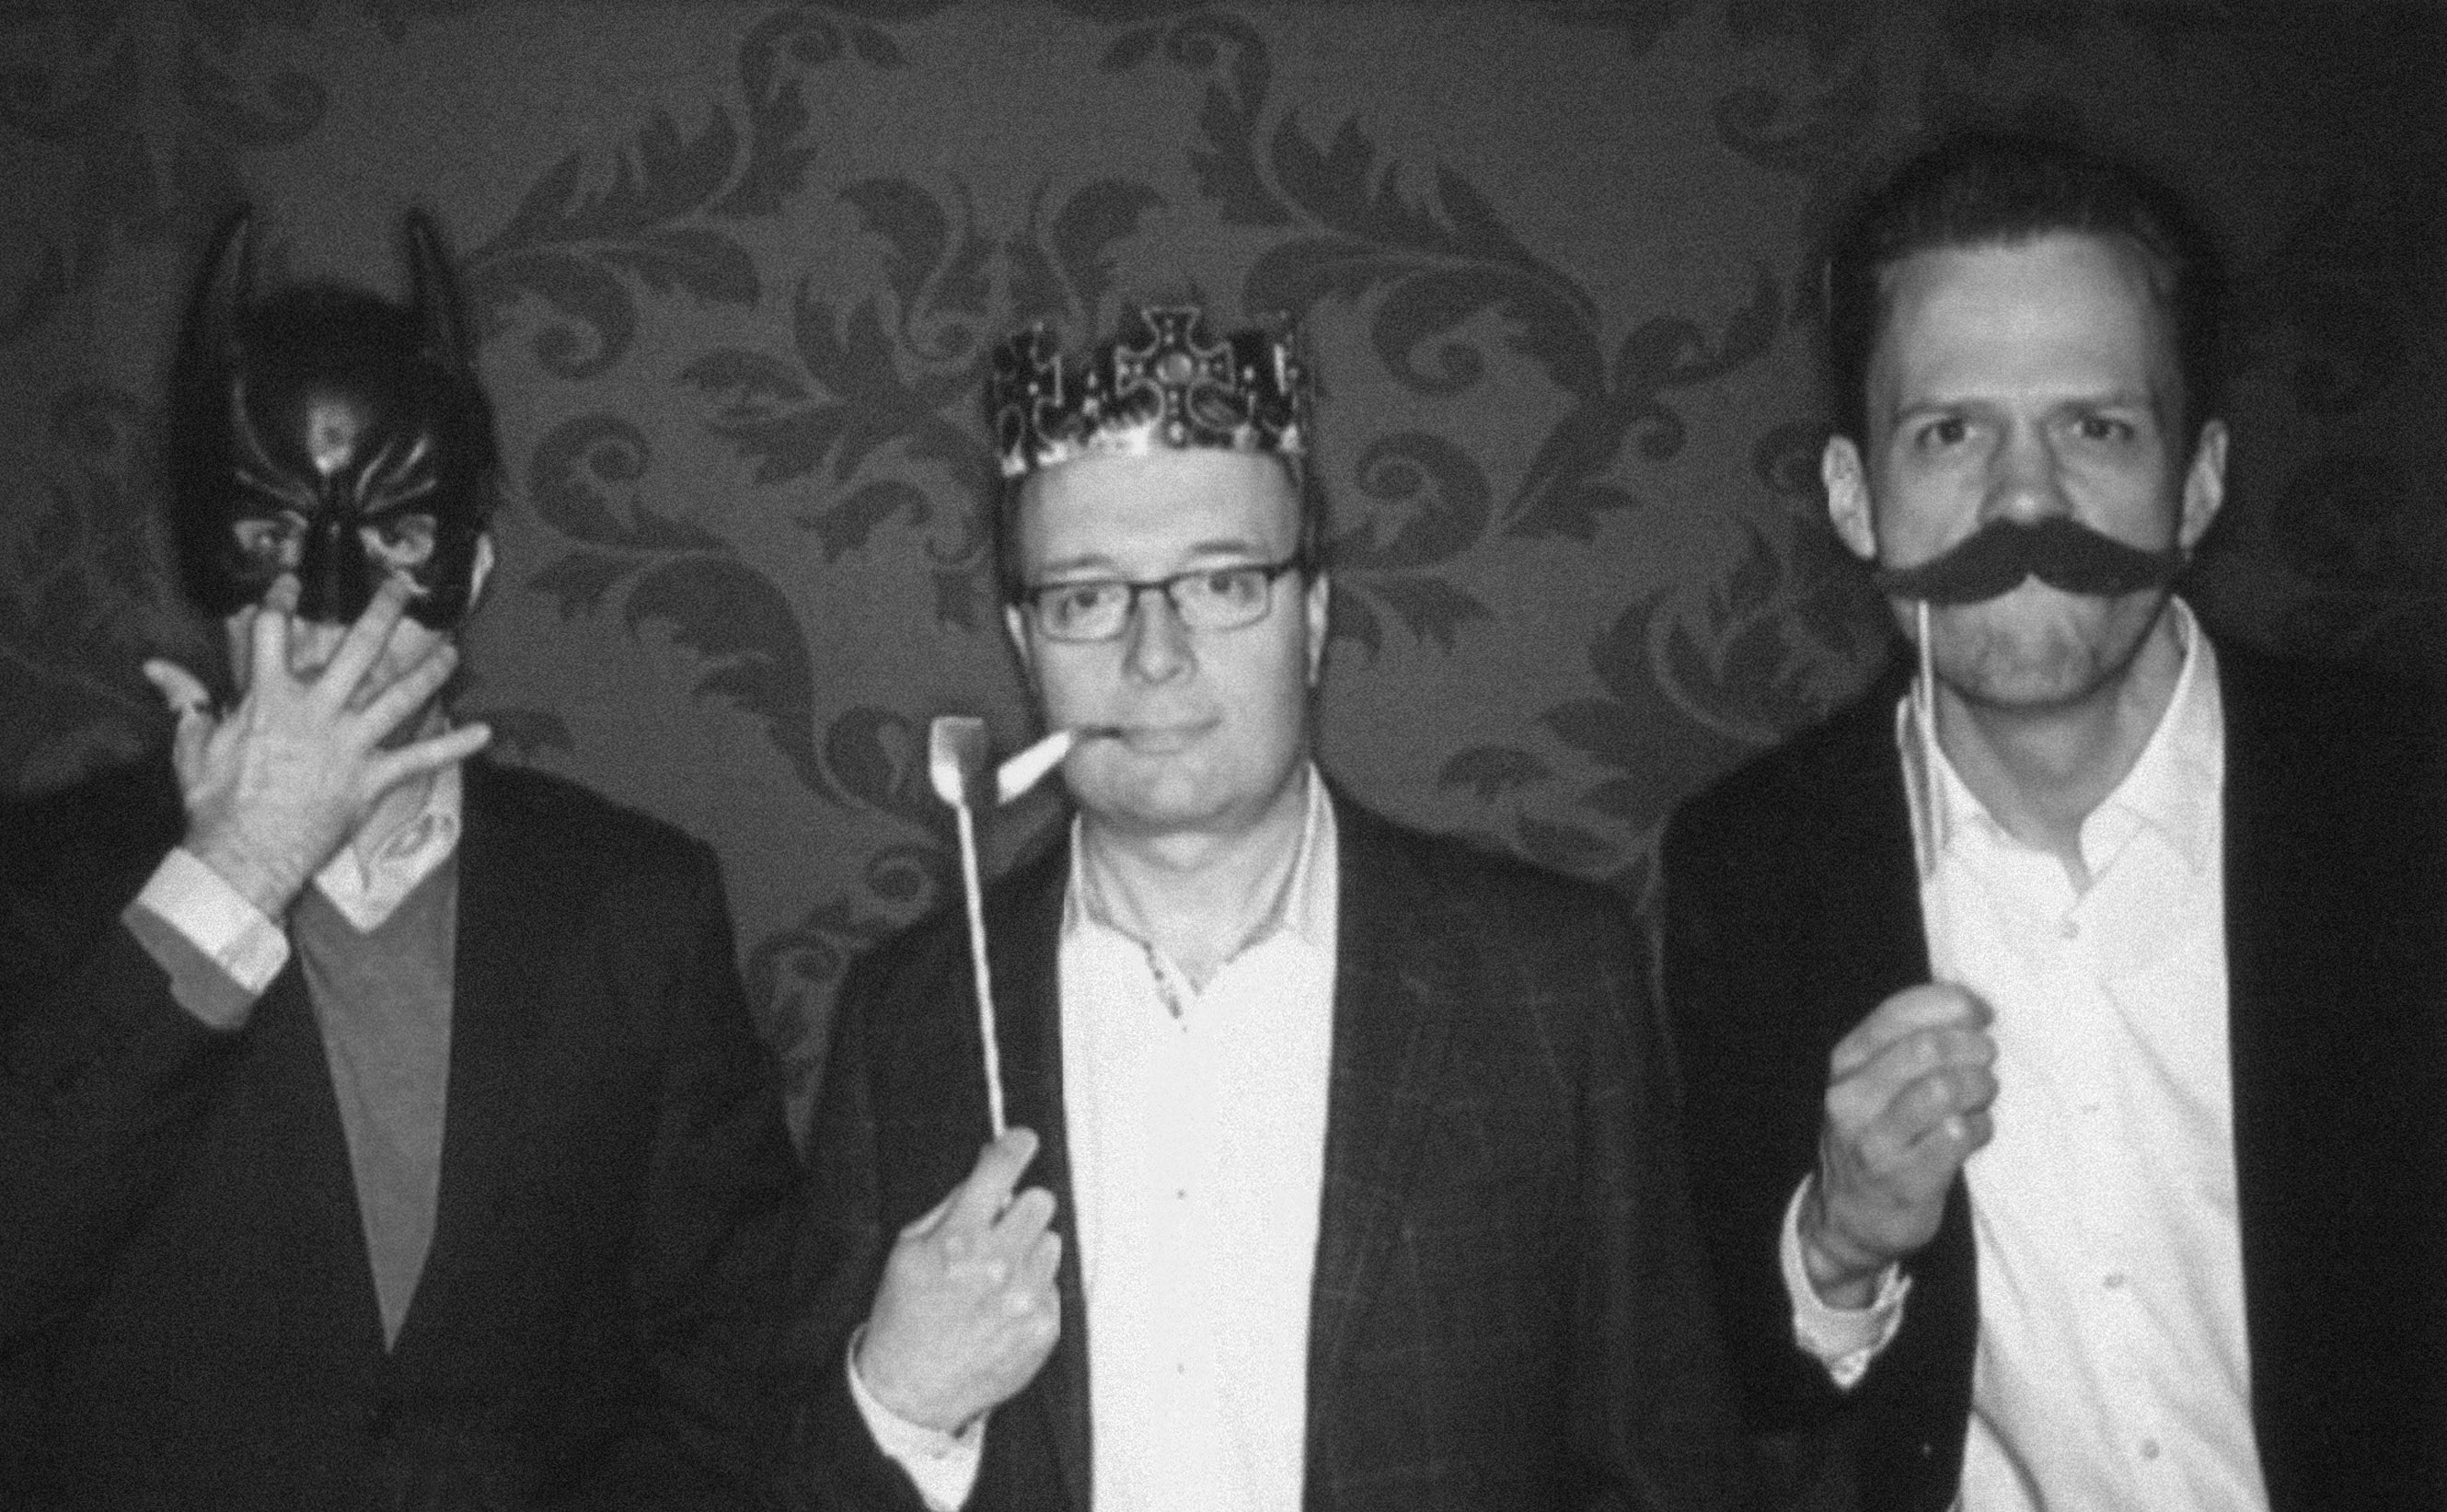 Marley Natural Website & Social Campaign Wins ADDYs: Blake, Ian & Colin at the at Seattle's 2015 ADDYs Photobooth, Shot 4